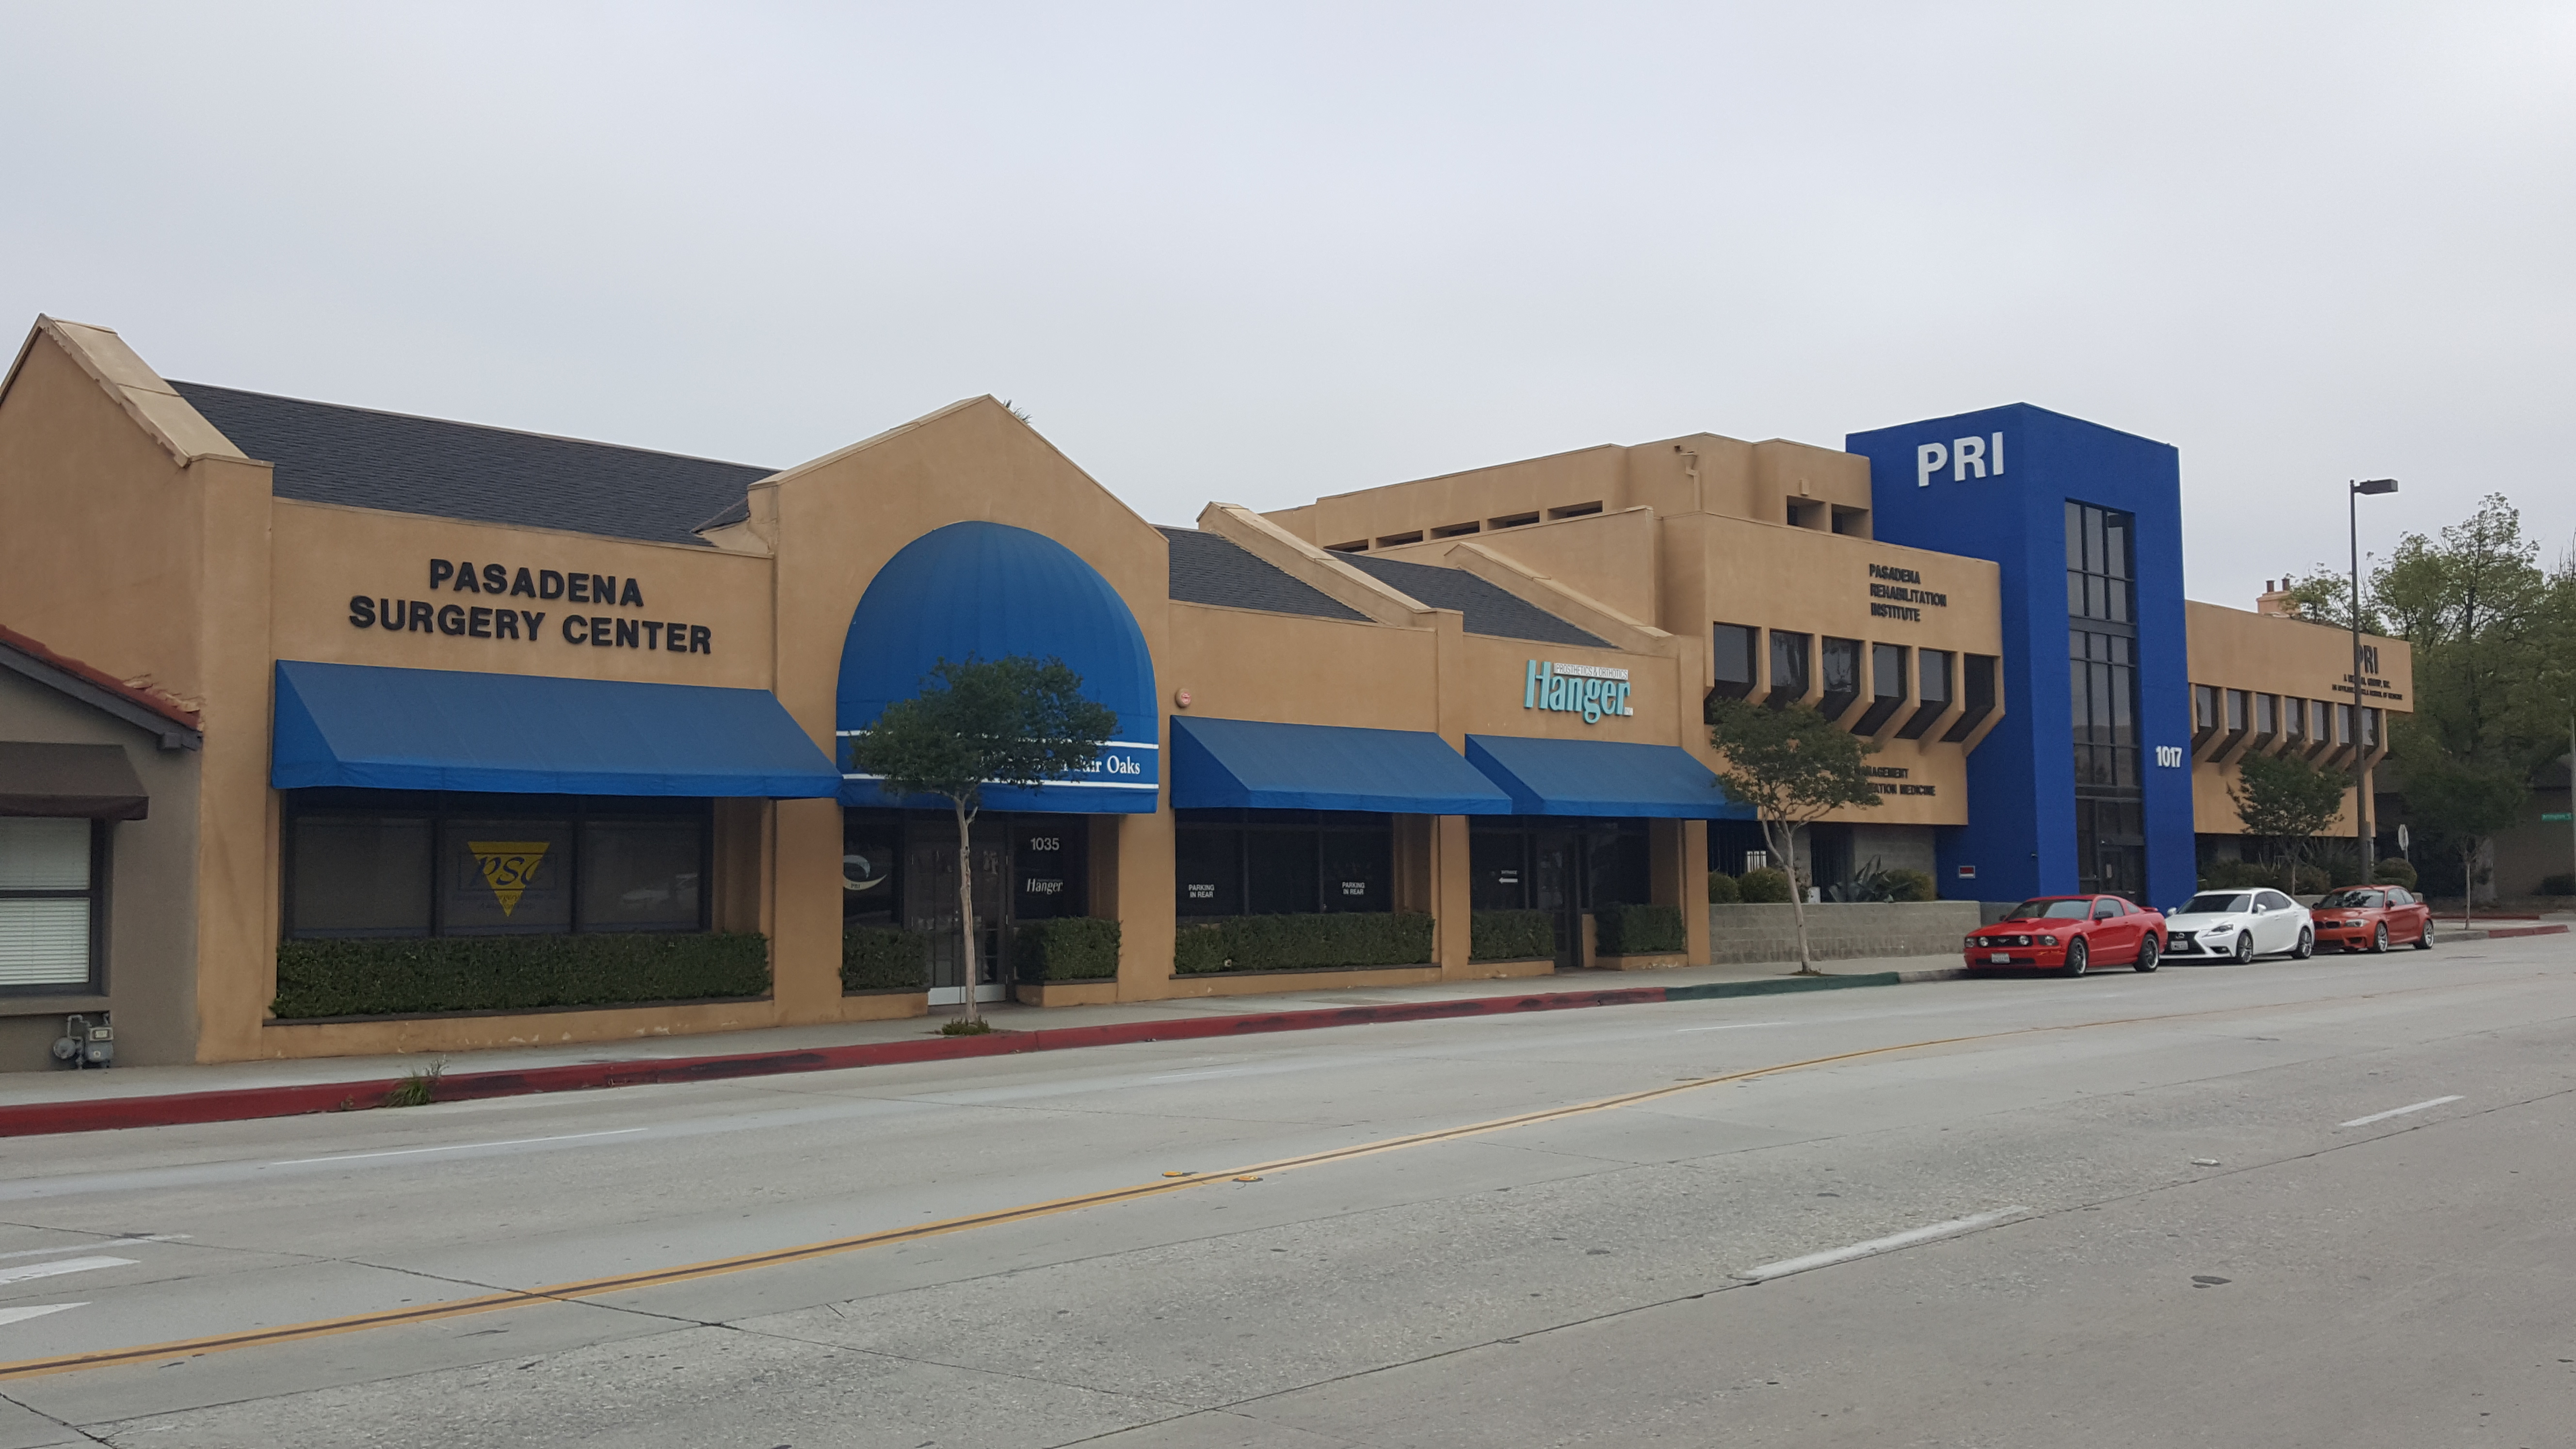 Capital Square 1031 Completes DST Offering of a SoCal Medical Portfolio